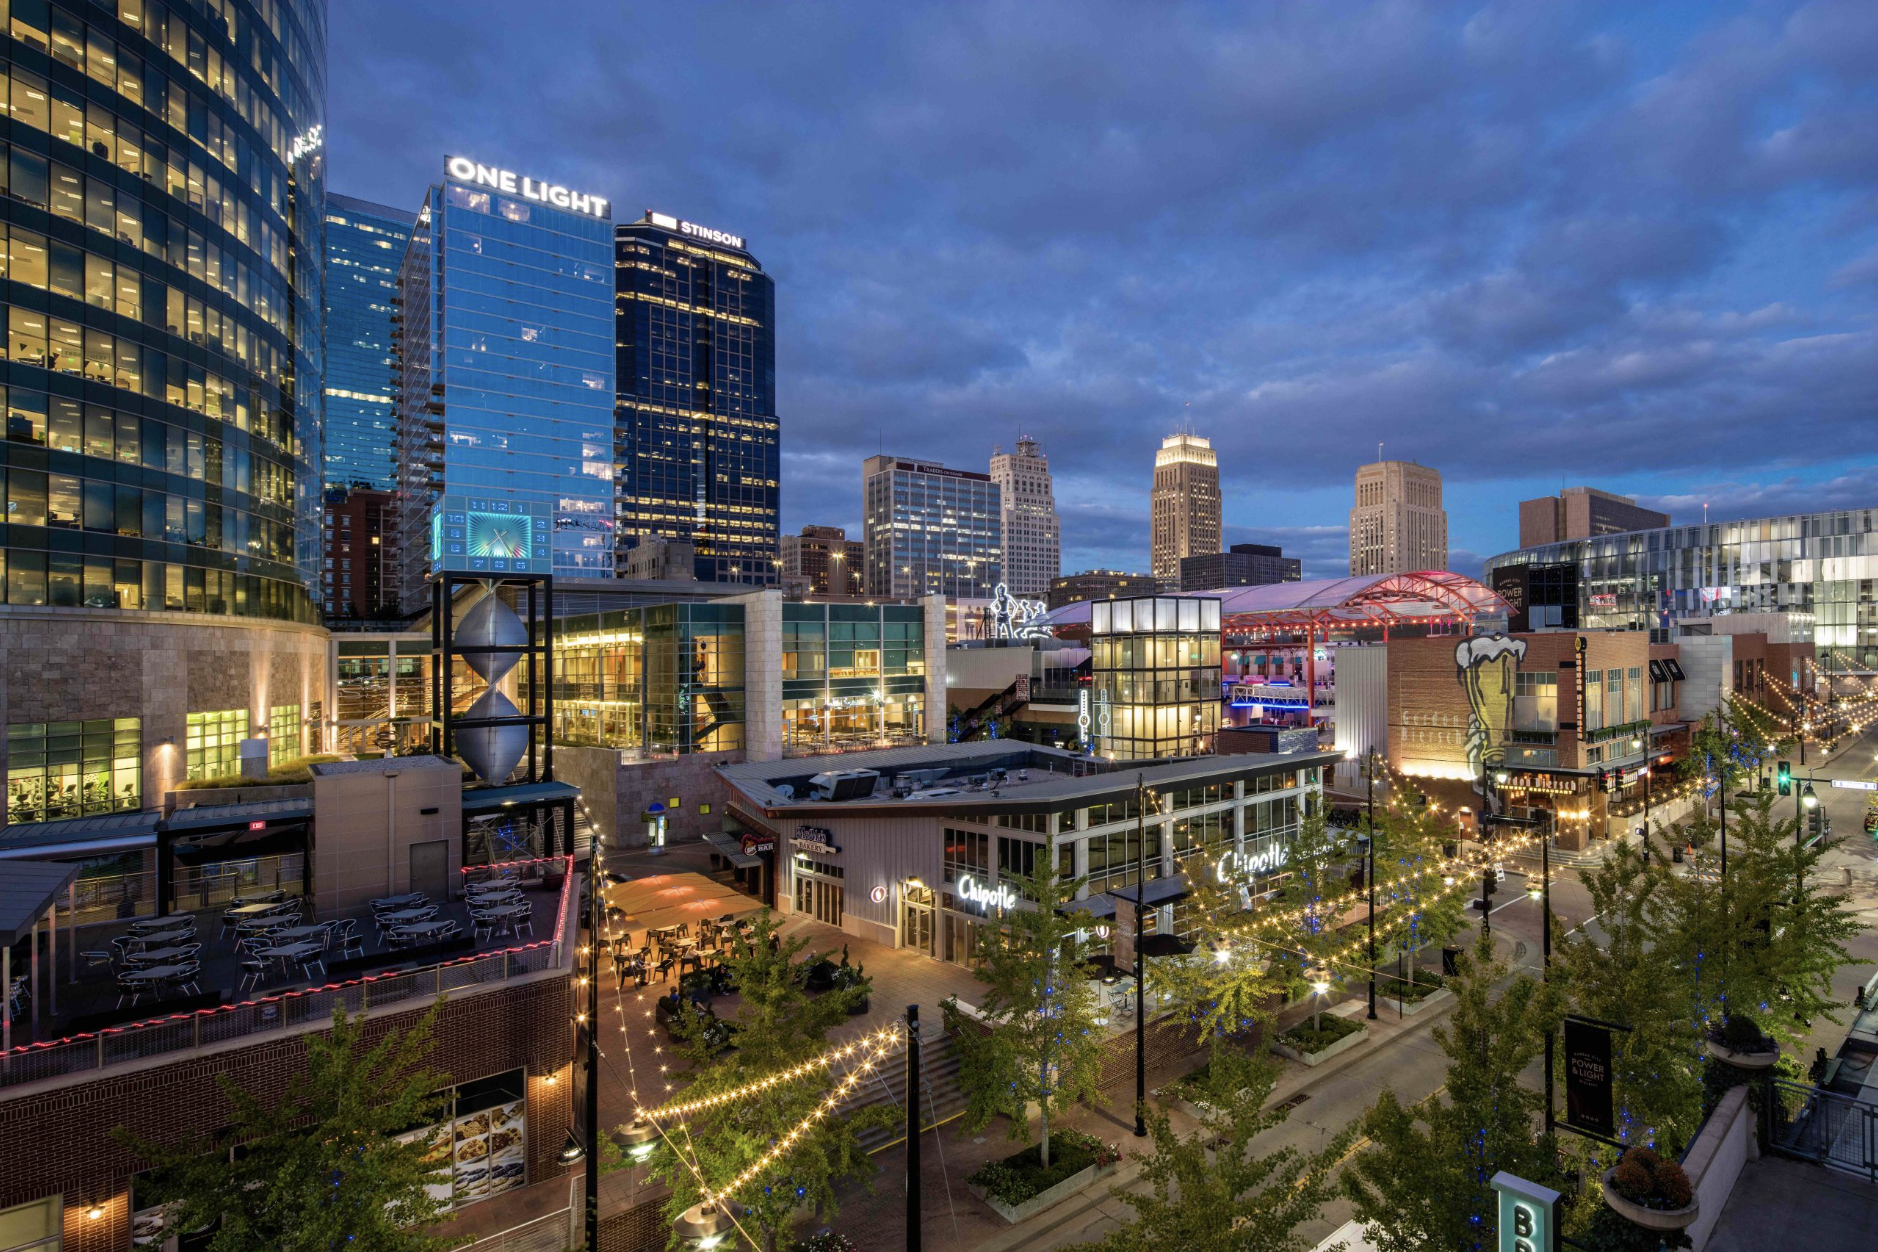 How Kansas City’s Power & Light District Ignites Communities With Live, Work, Play Areas